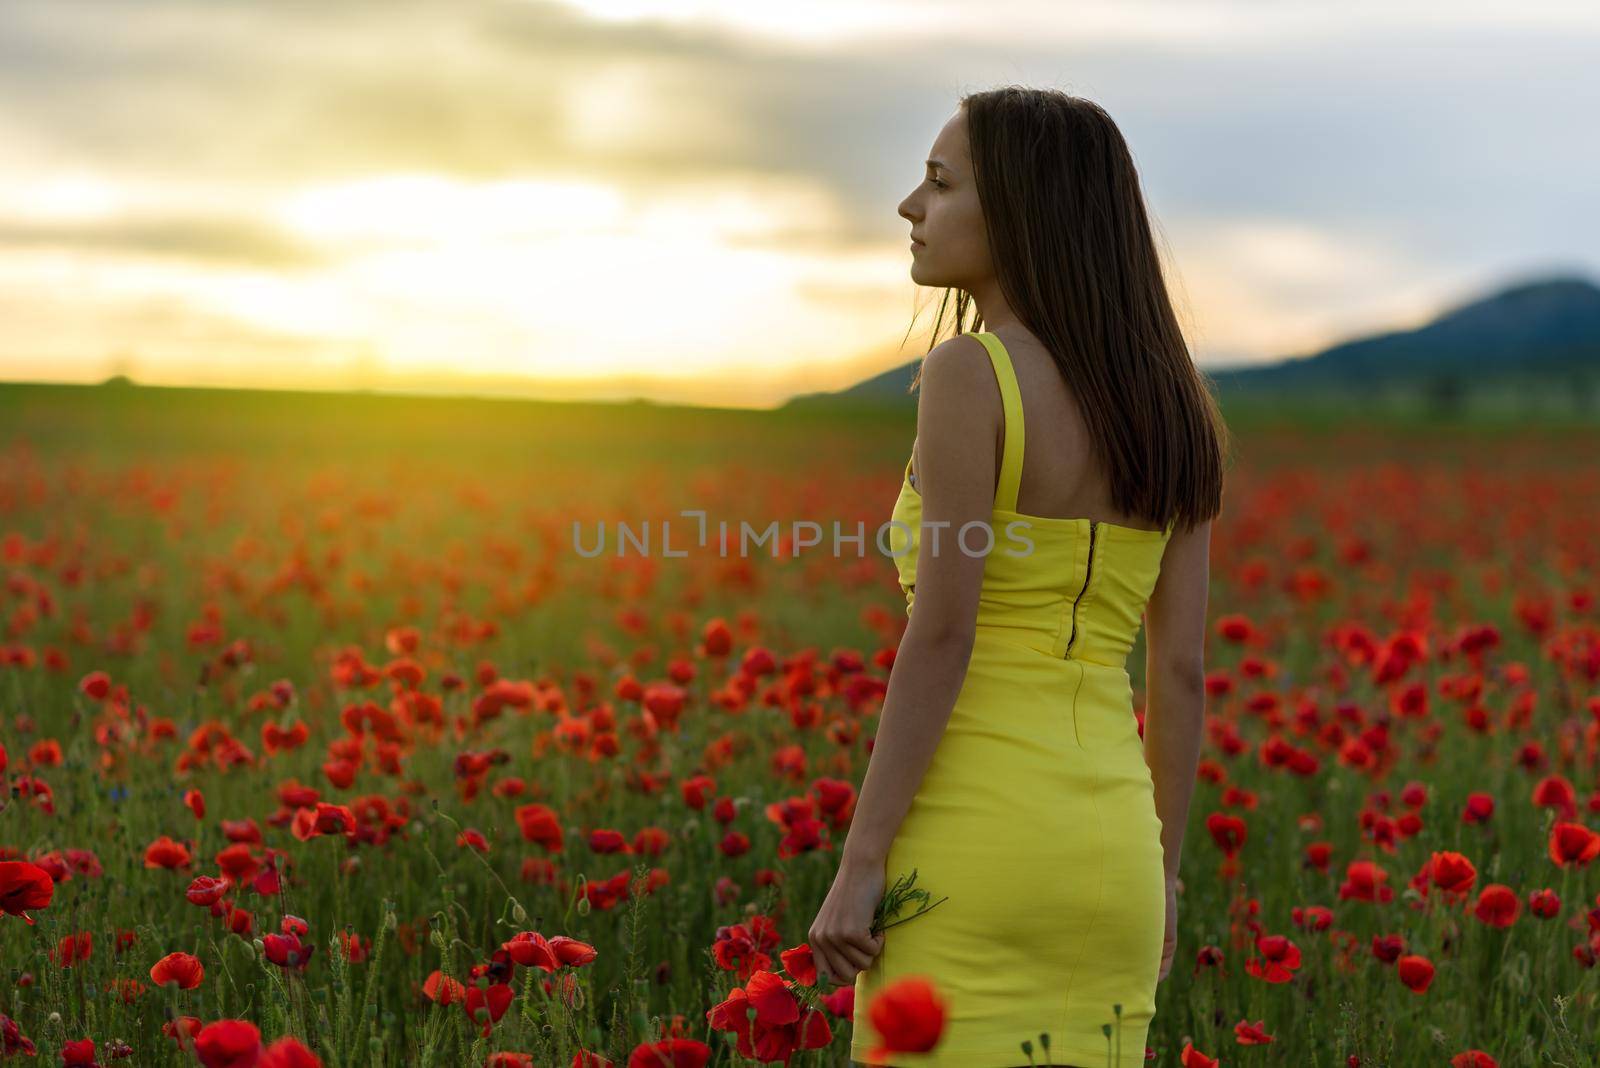 Woman in yellow dress standing in field of poppies